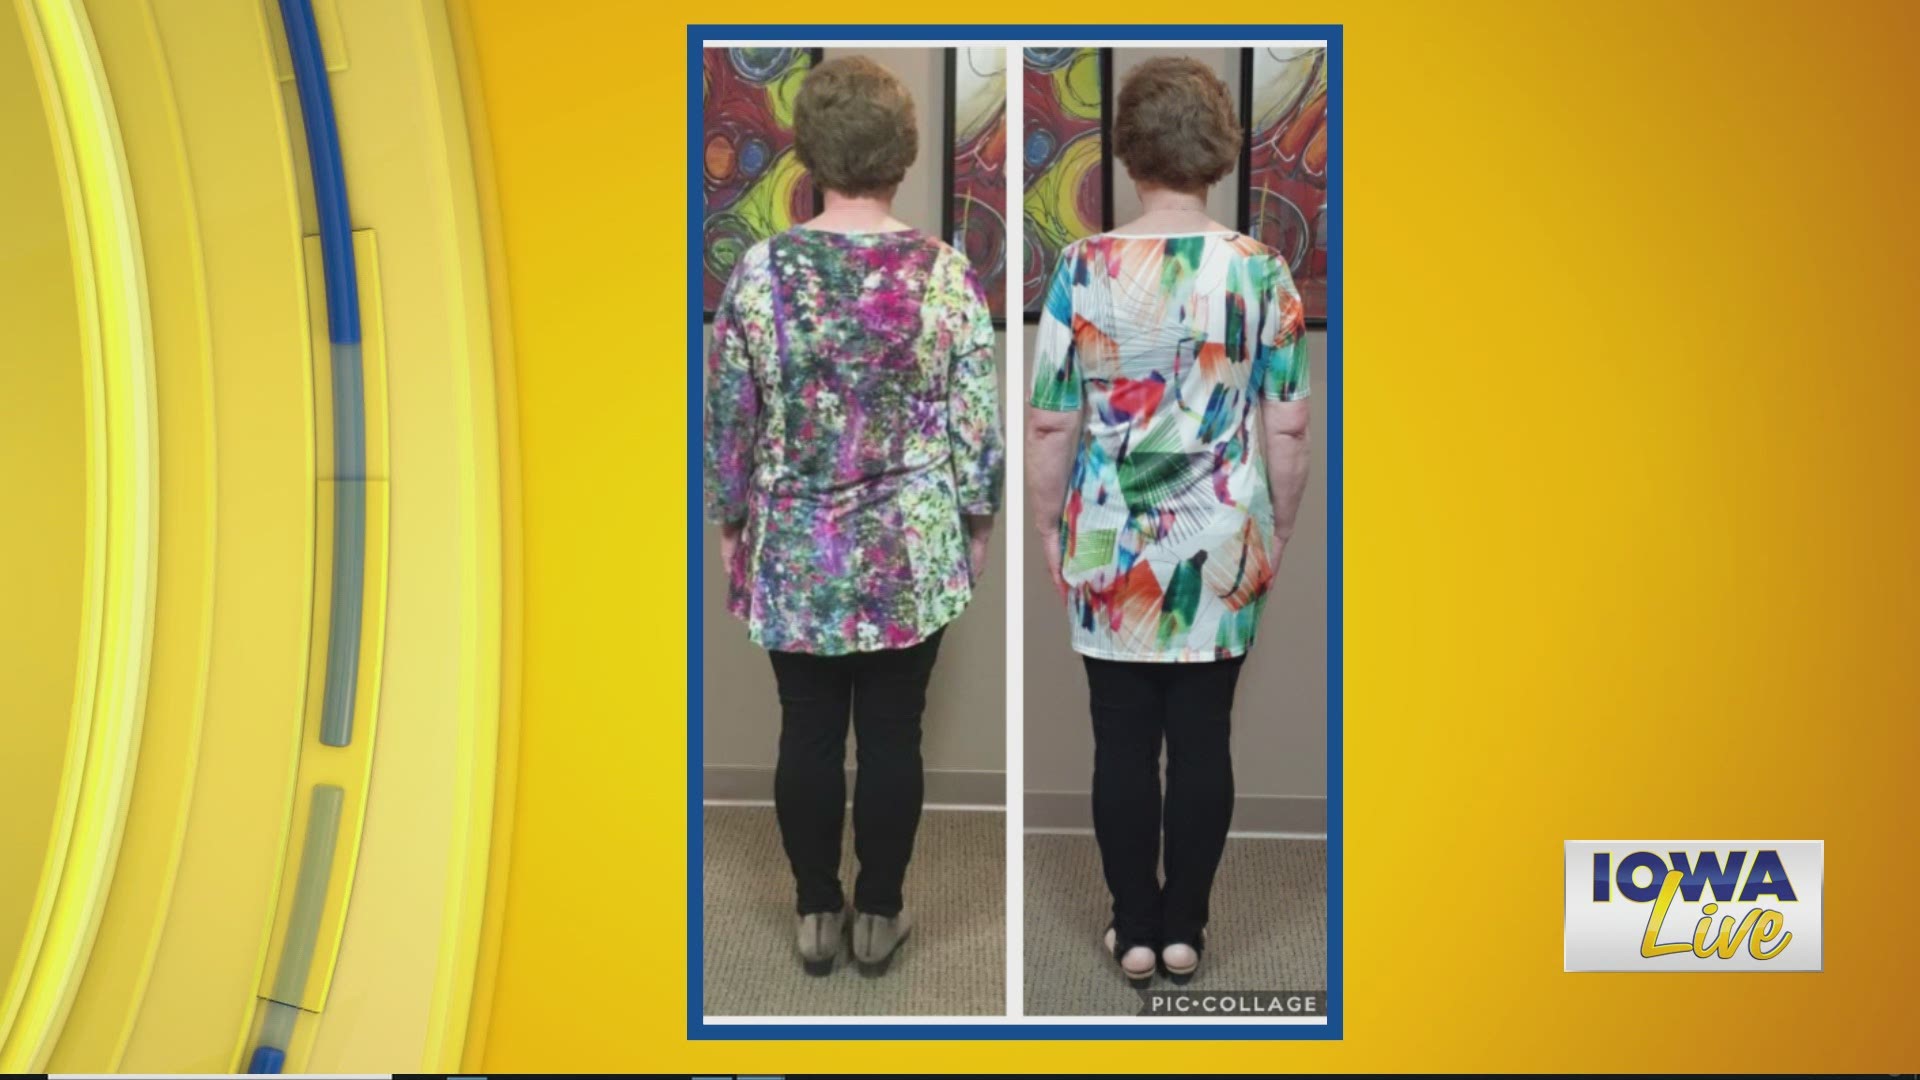 Julie has lost 24 pounds already with Dr. Vince Hassel's weight loss program